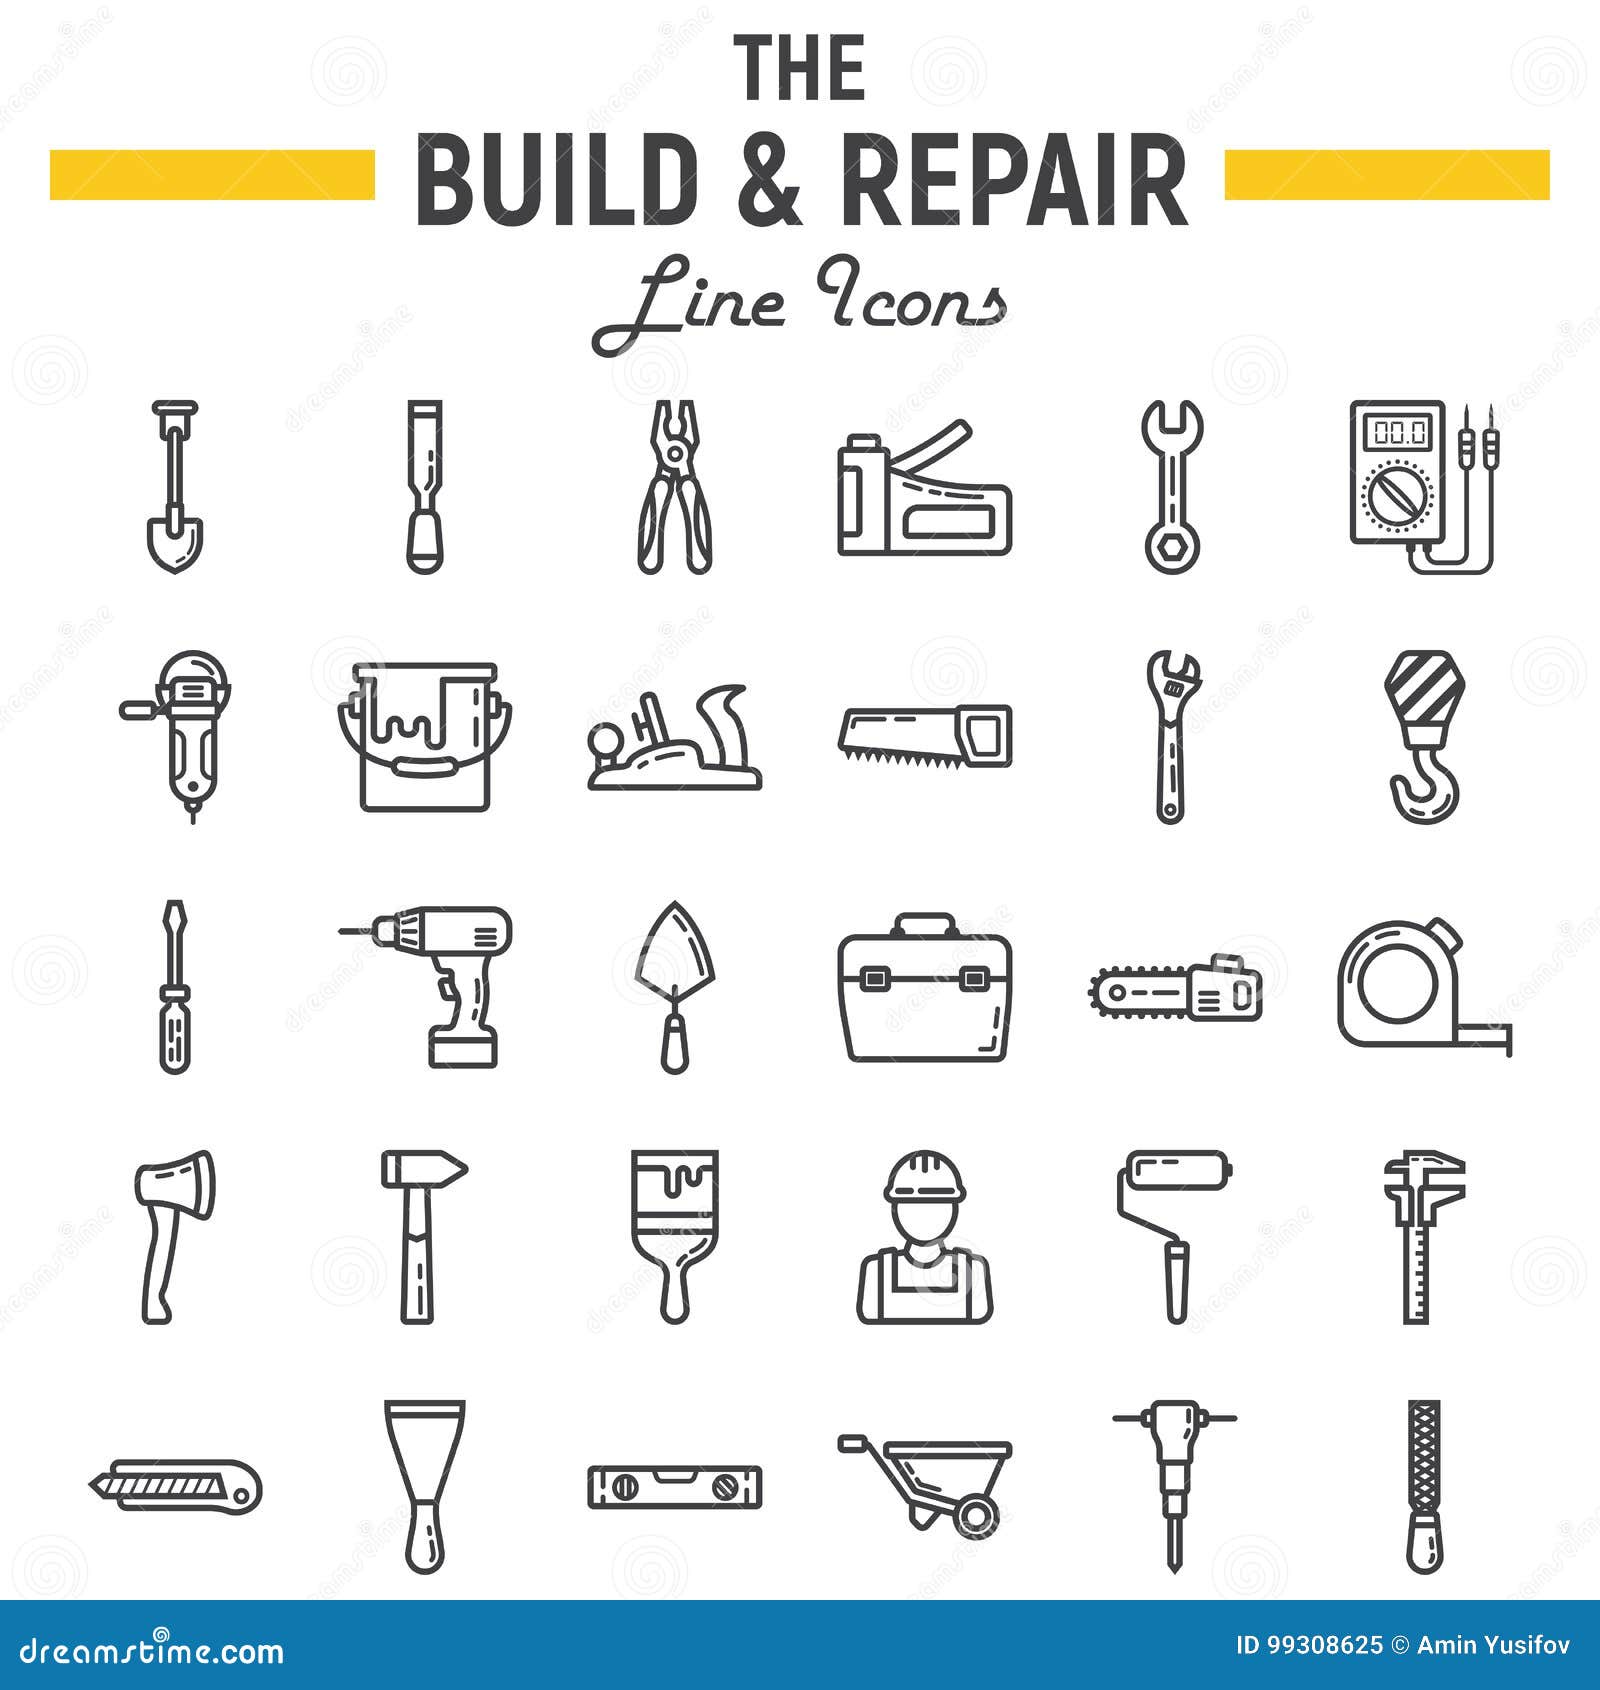 build and repair line icon set, construction signs